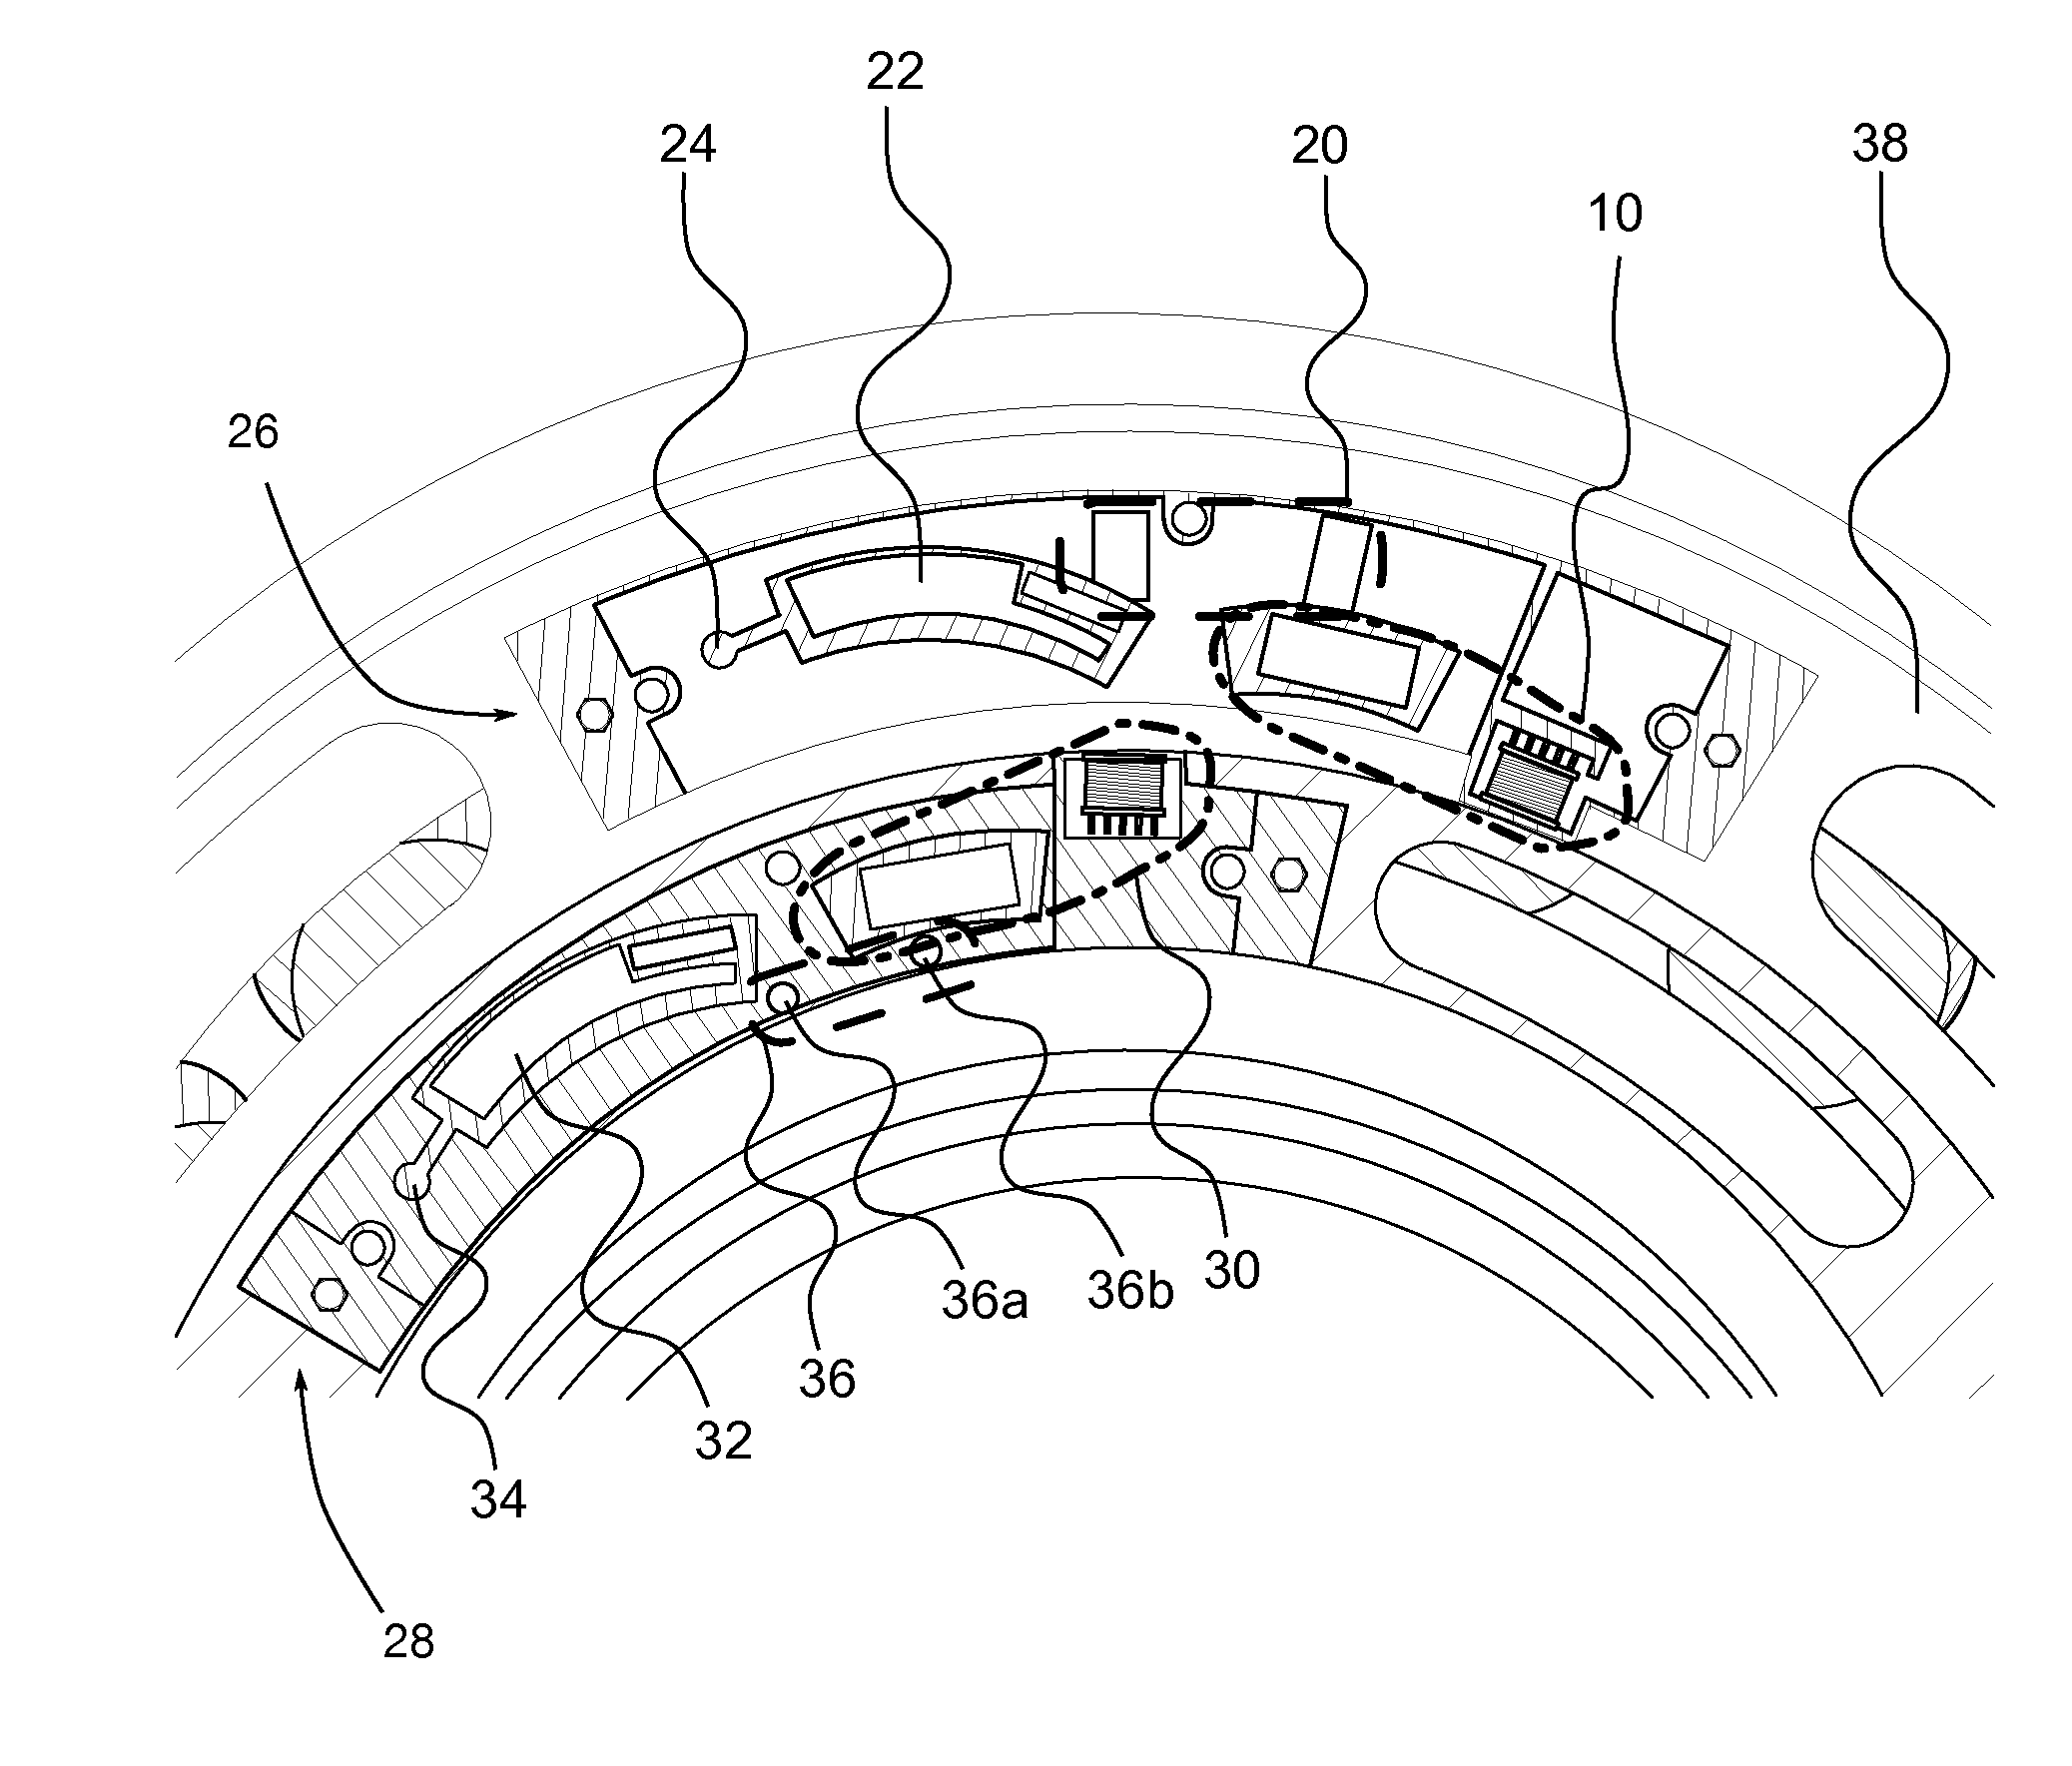 Module for determining an operating characteristic of a bearing